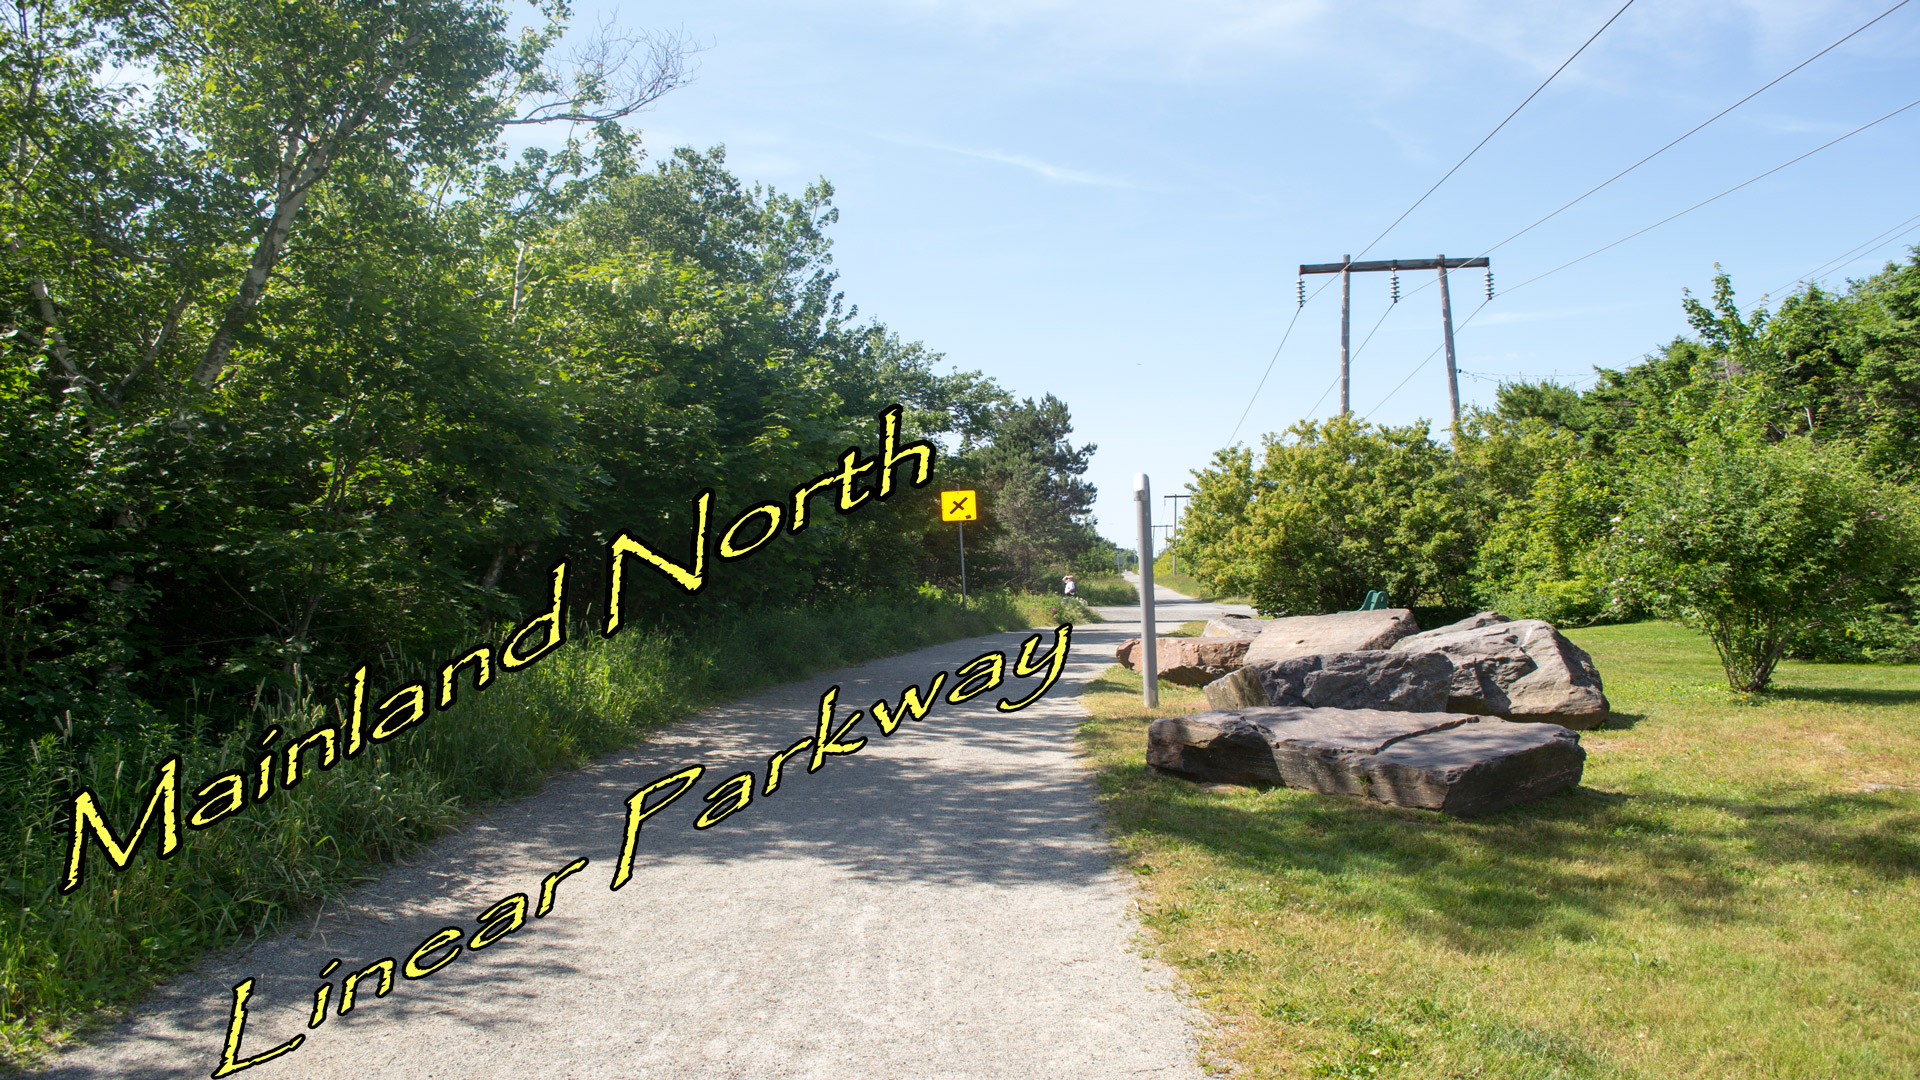 Mainland North Linear Parkway